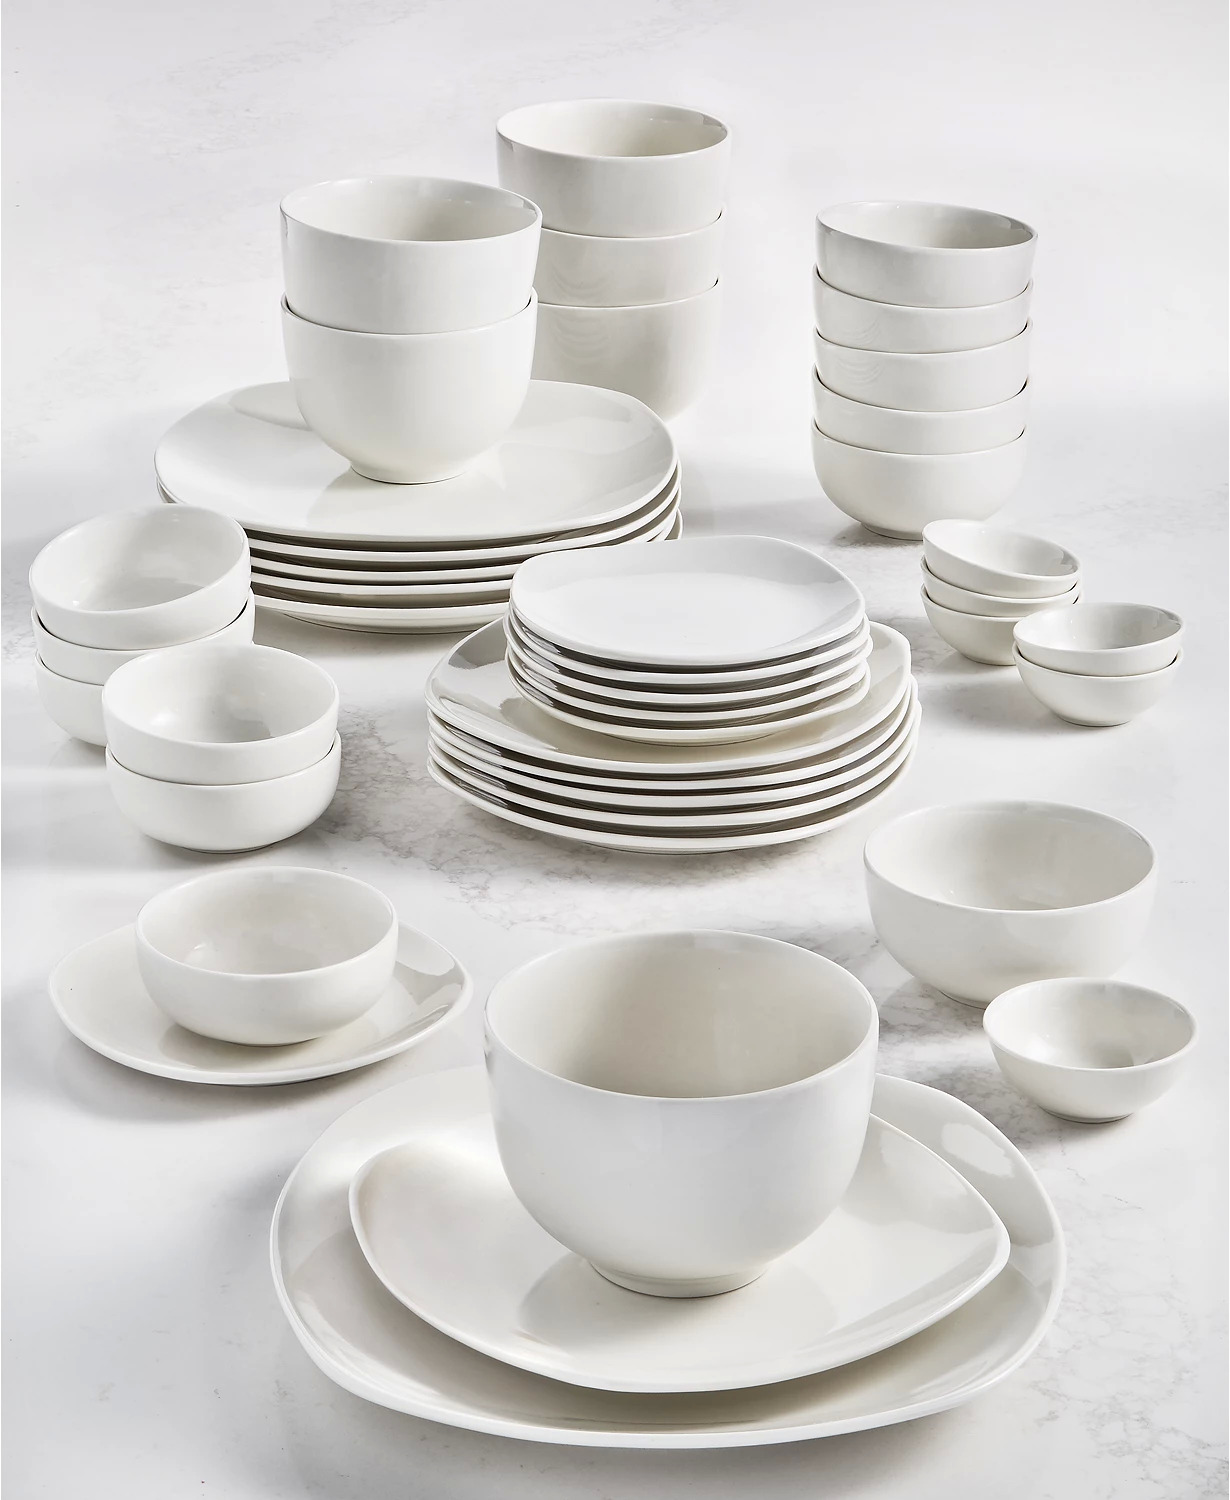 42-Piece Tabletops Unlimited Whiteware Dinnerware Set (Service for 6) $40 + Free S&H